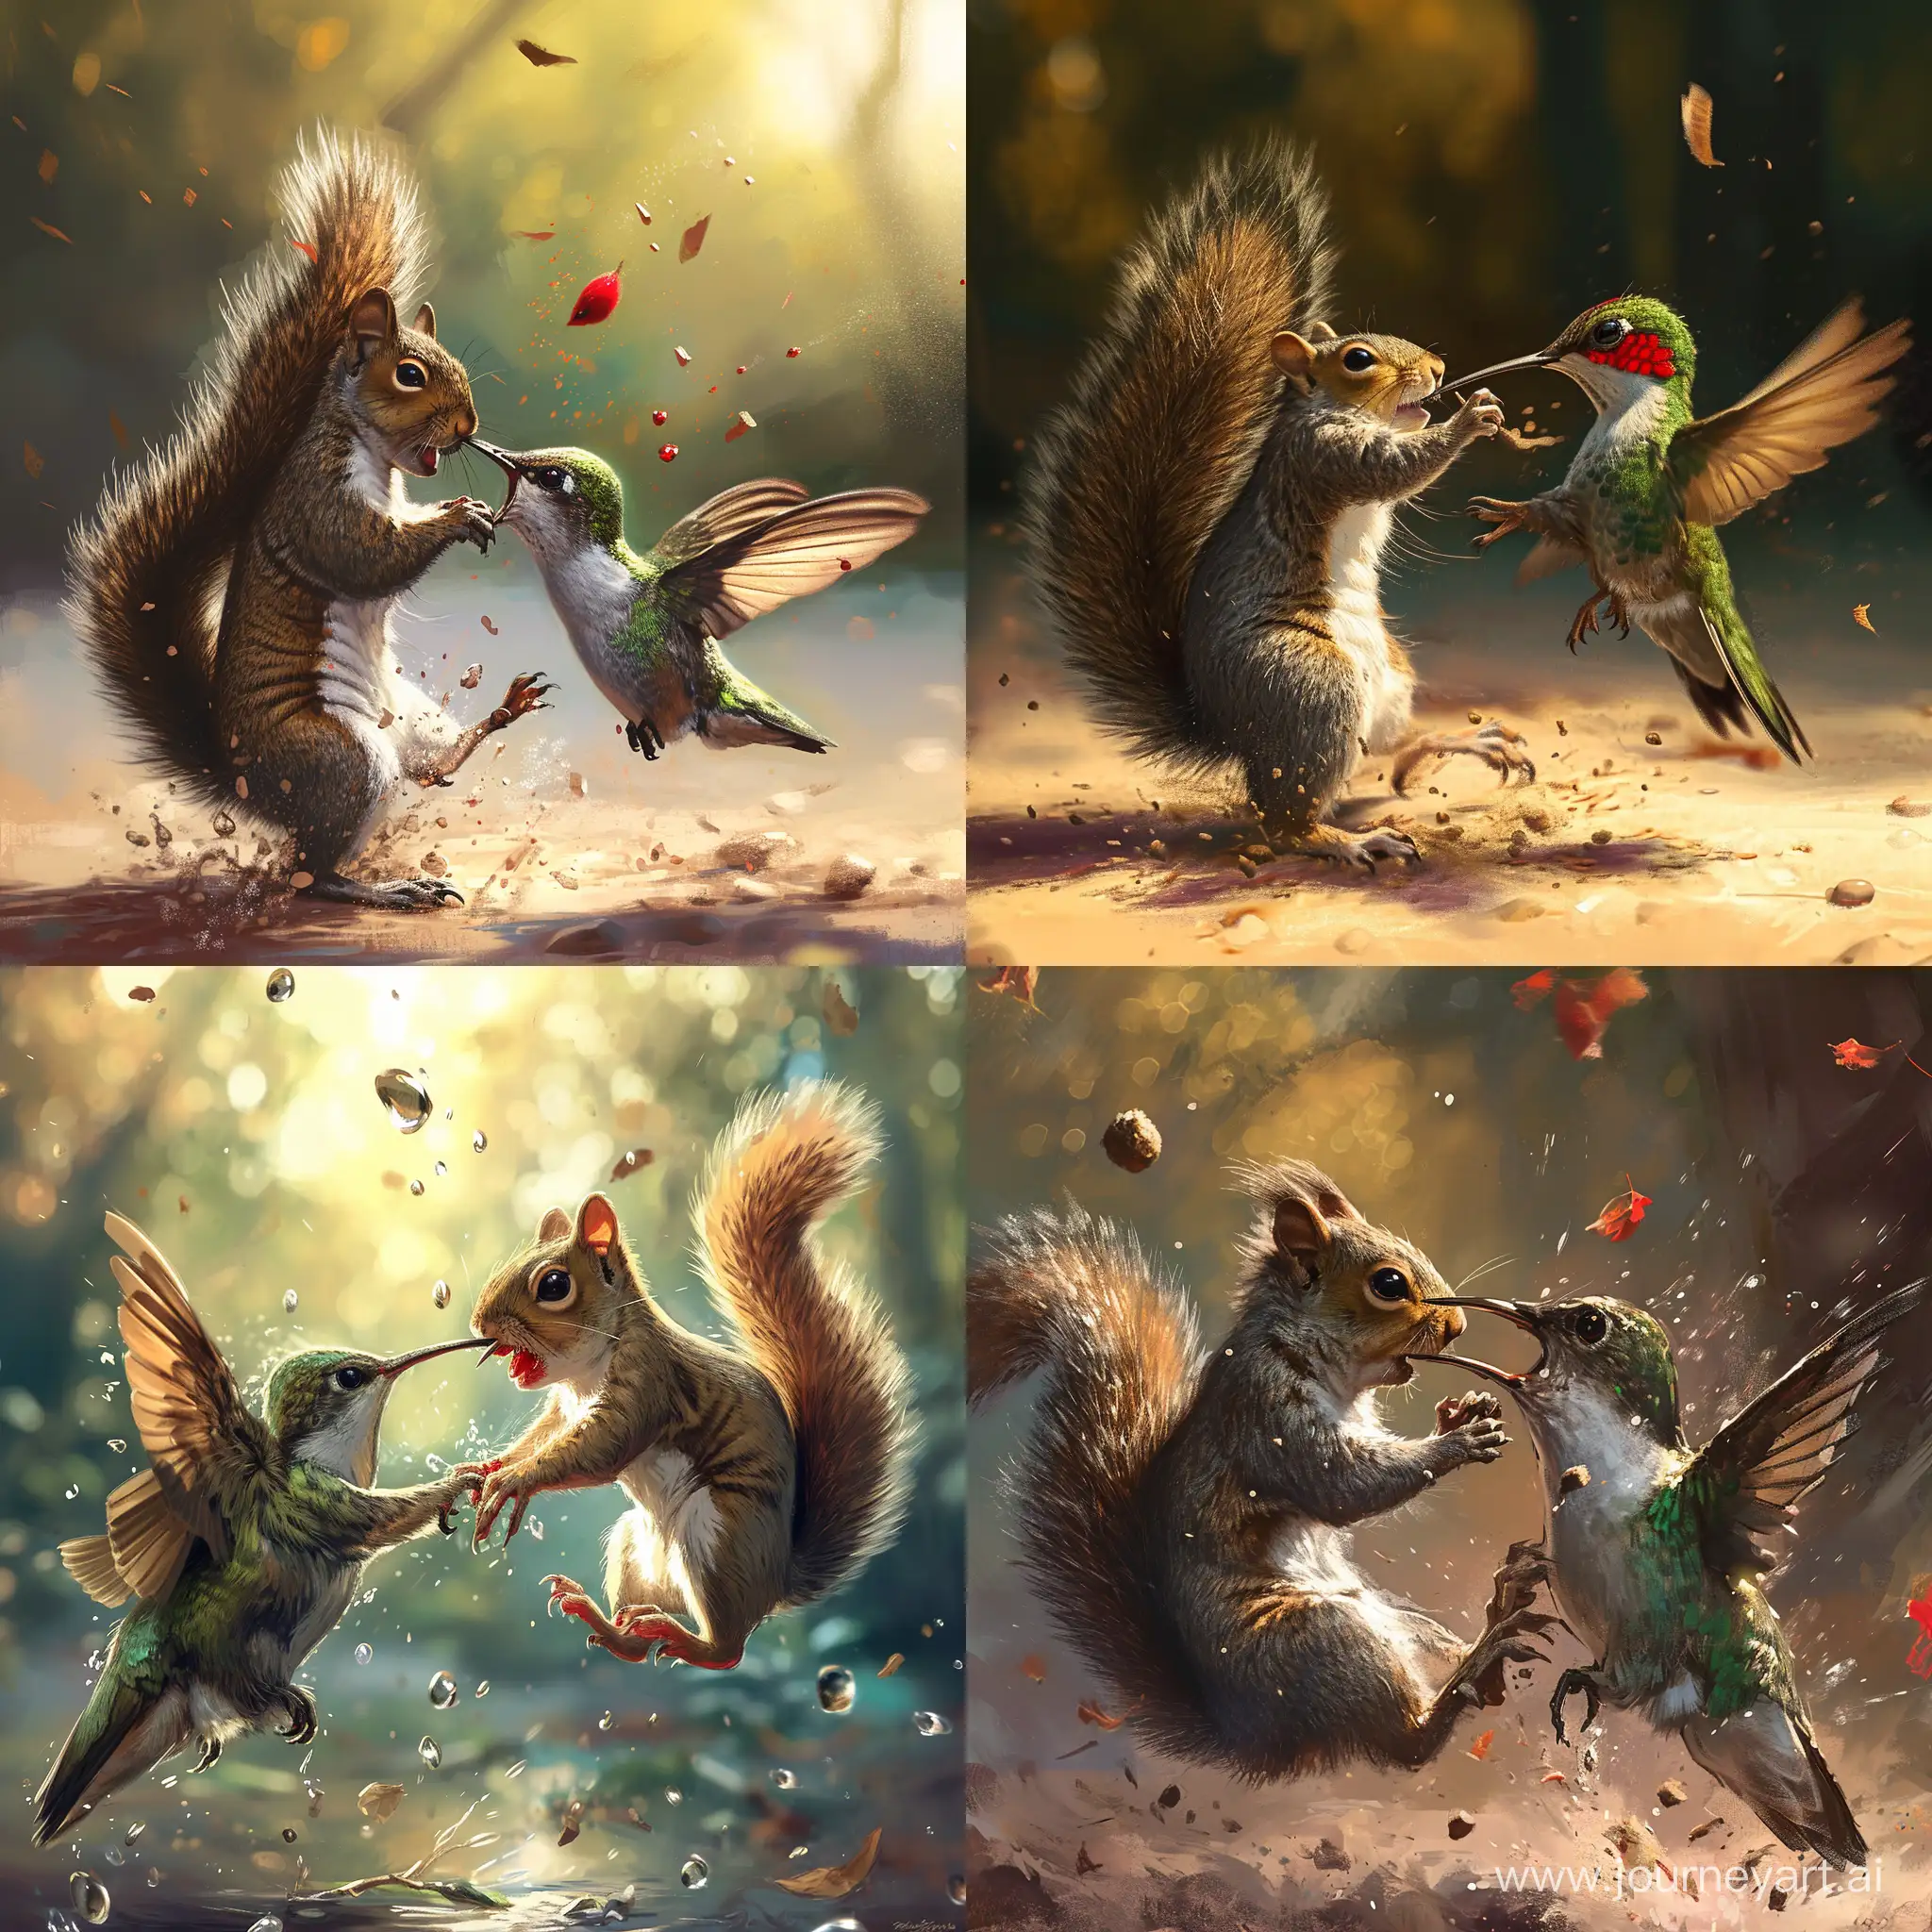 Squirrel fights hummingbird in anime style, epic battle, battle to the death